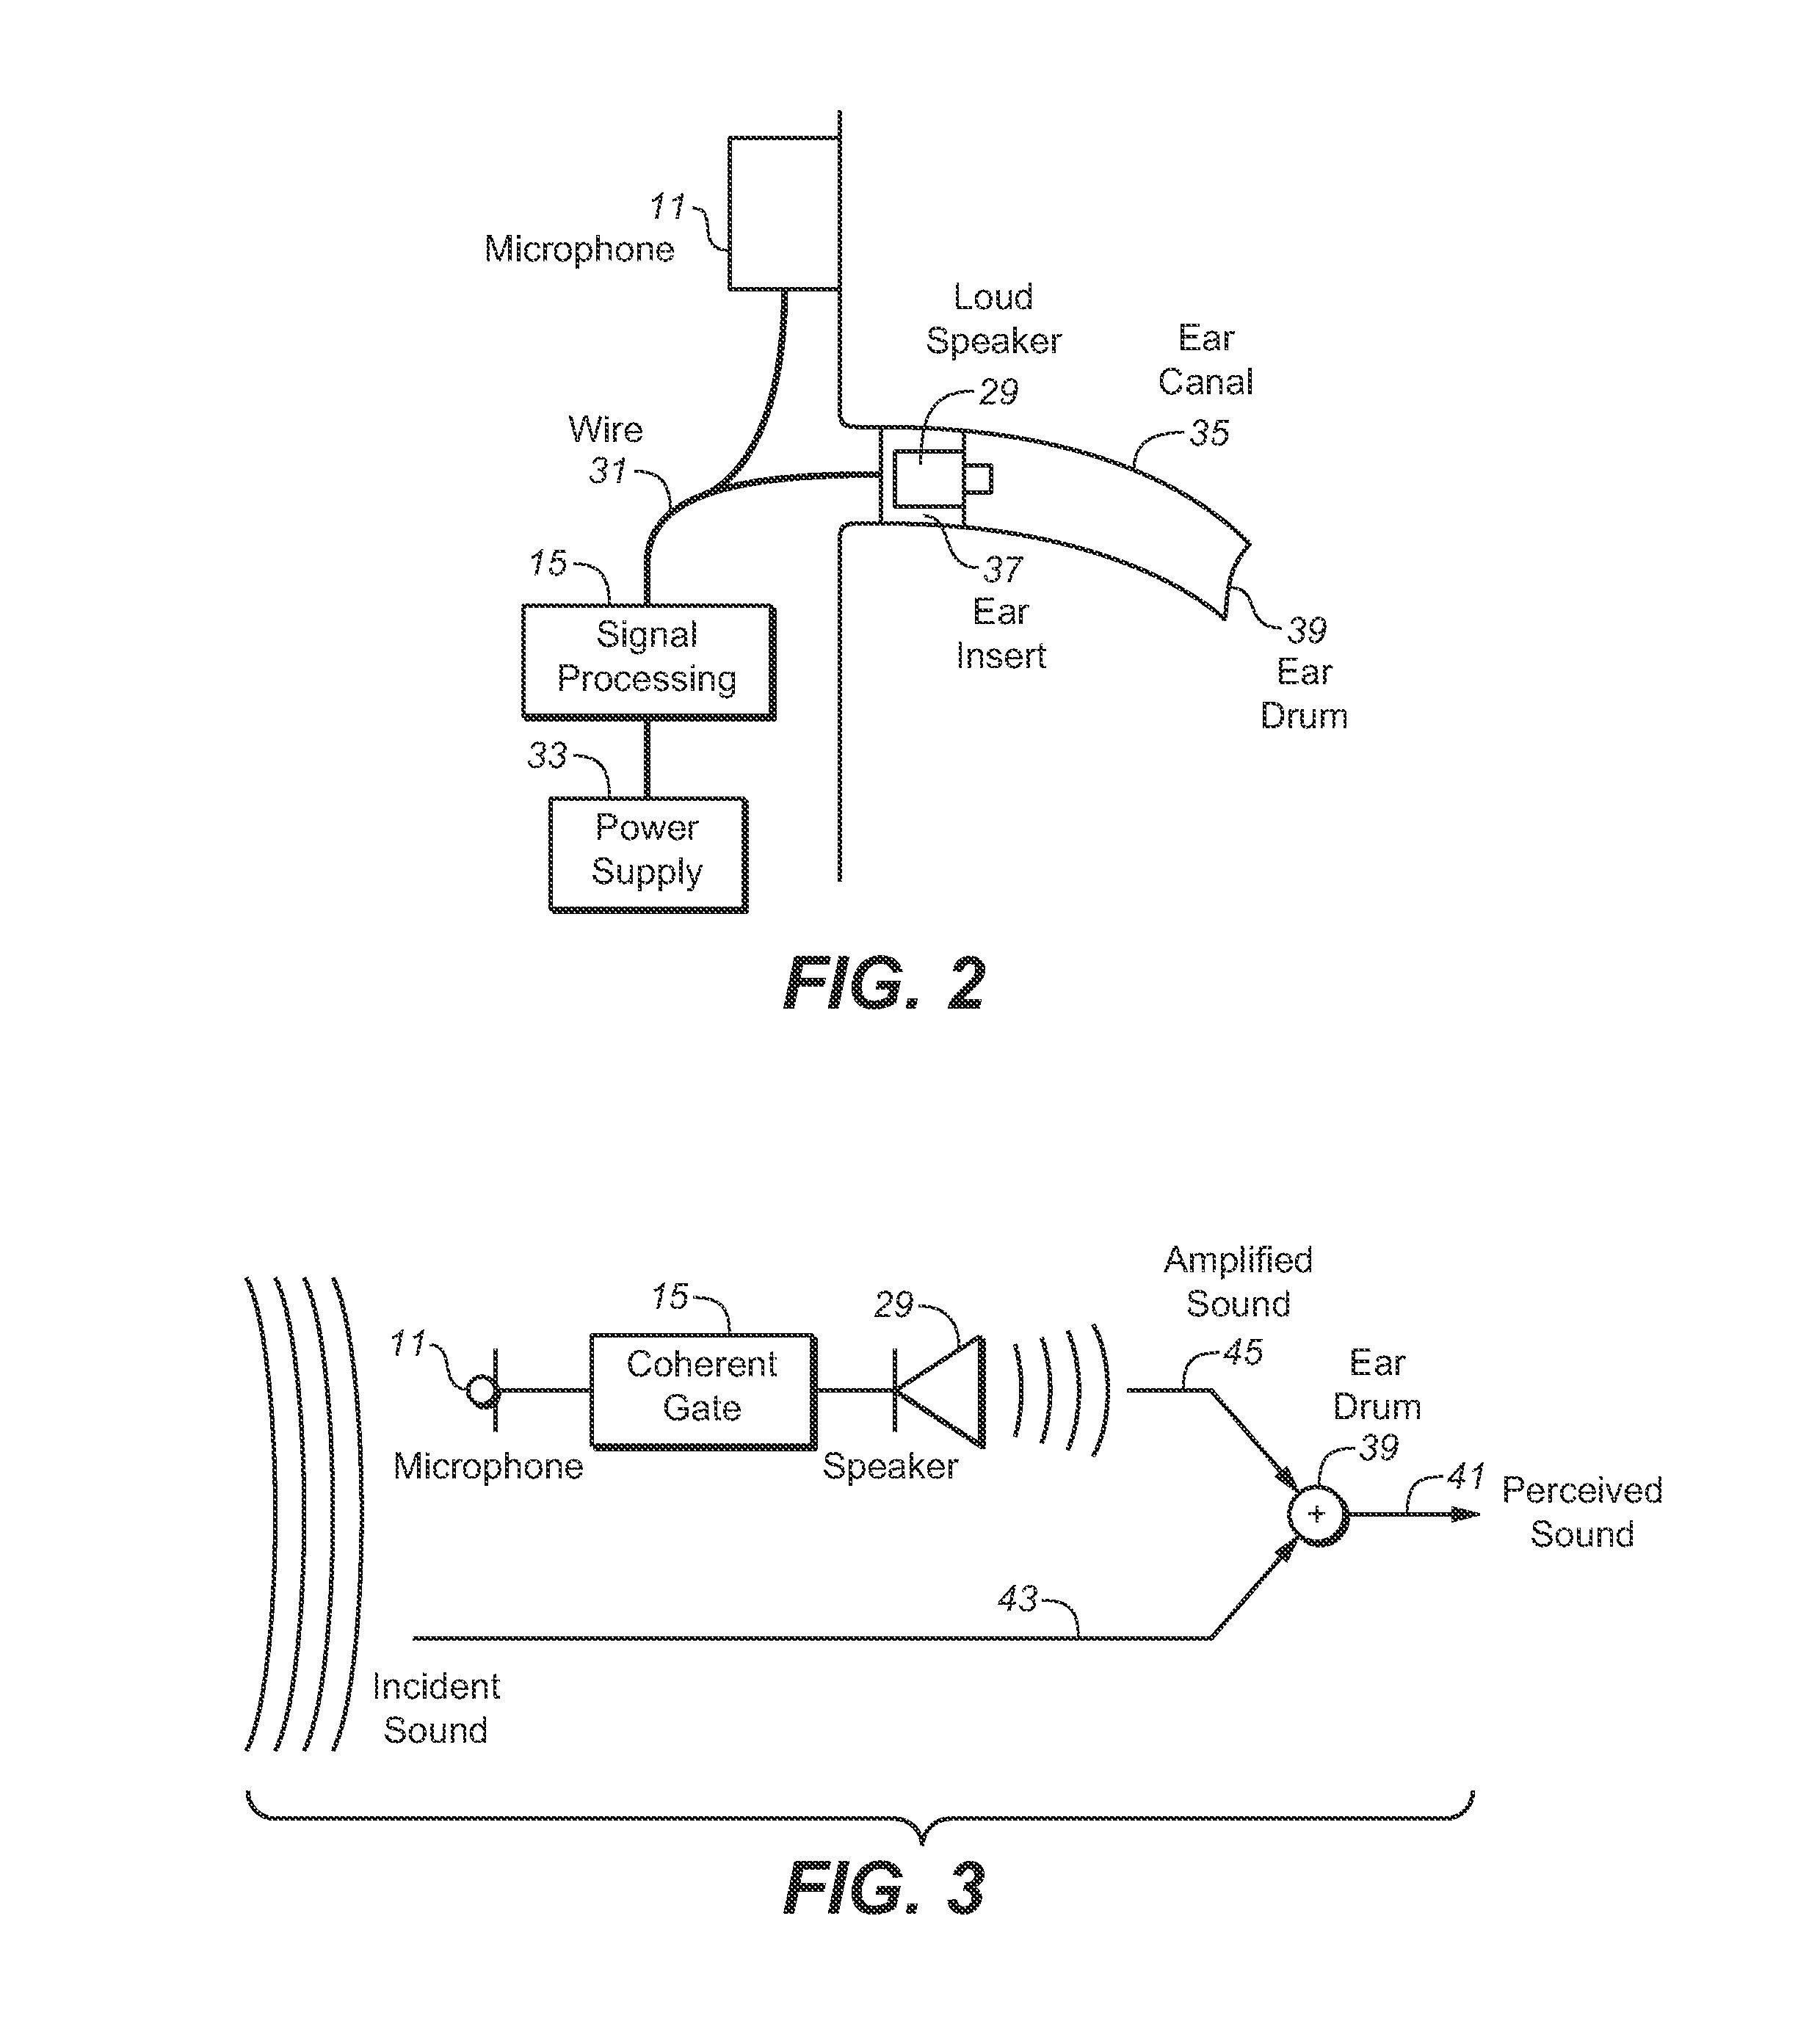 Hearing aid having level and frequency-dependent gain